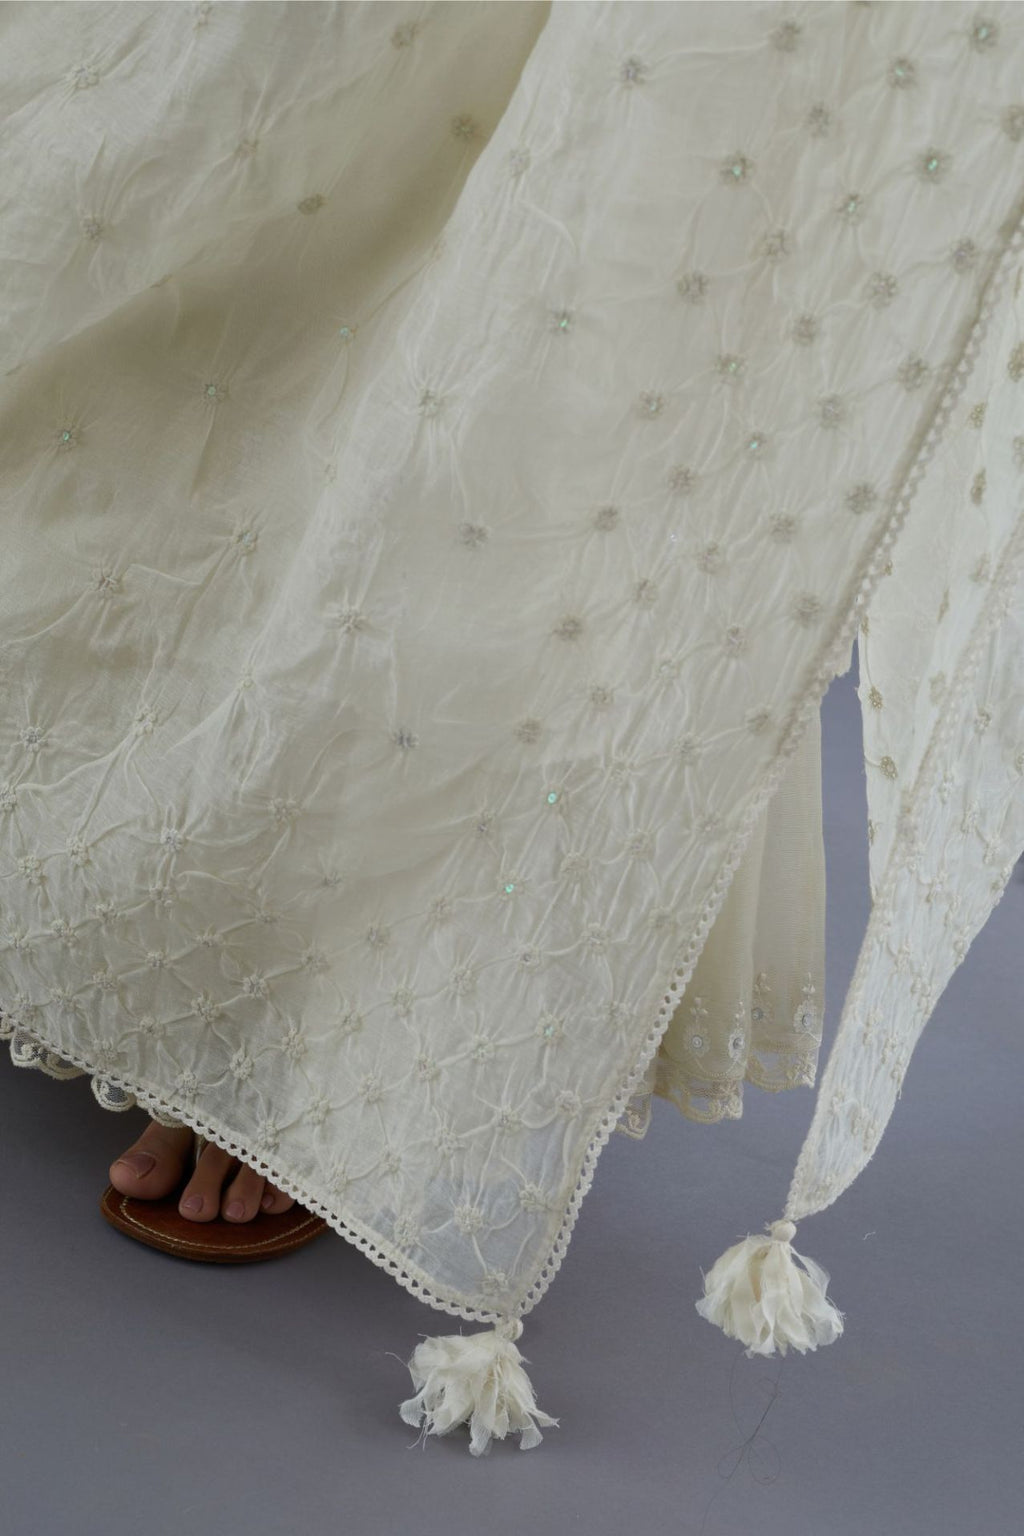 Cotton Chanderi dupatta with all over knotted thread embroidery and fabric tassels at all corners.